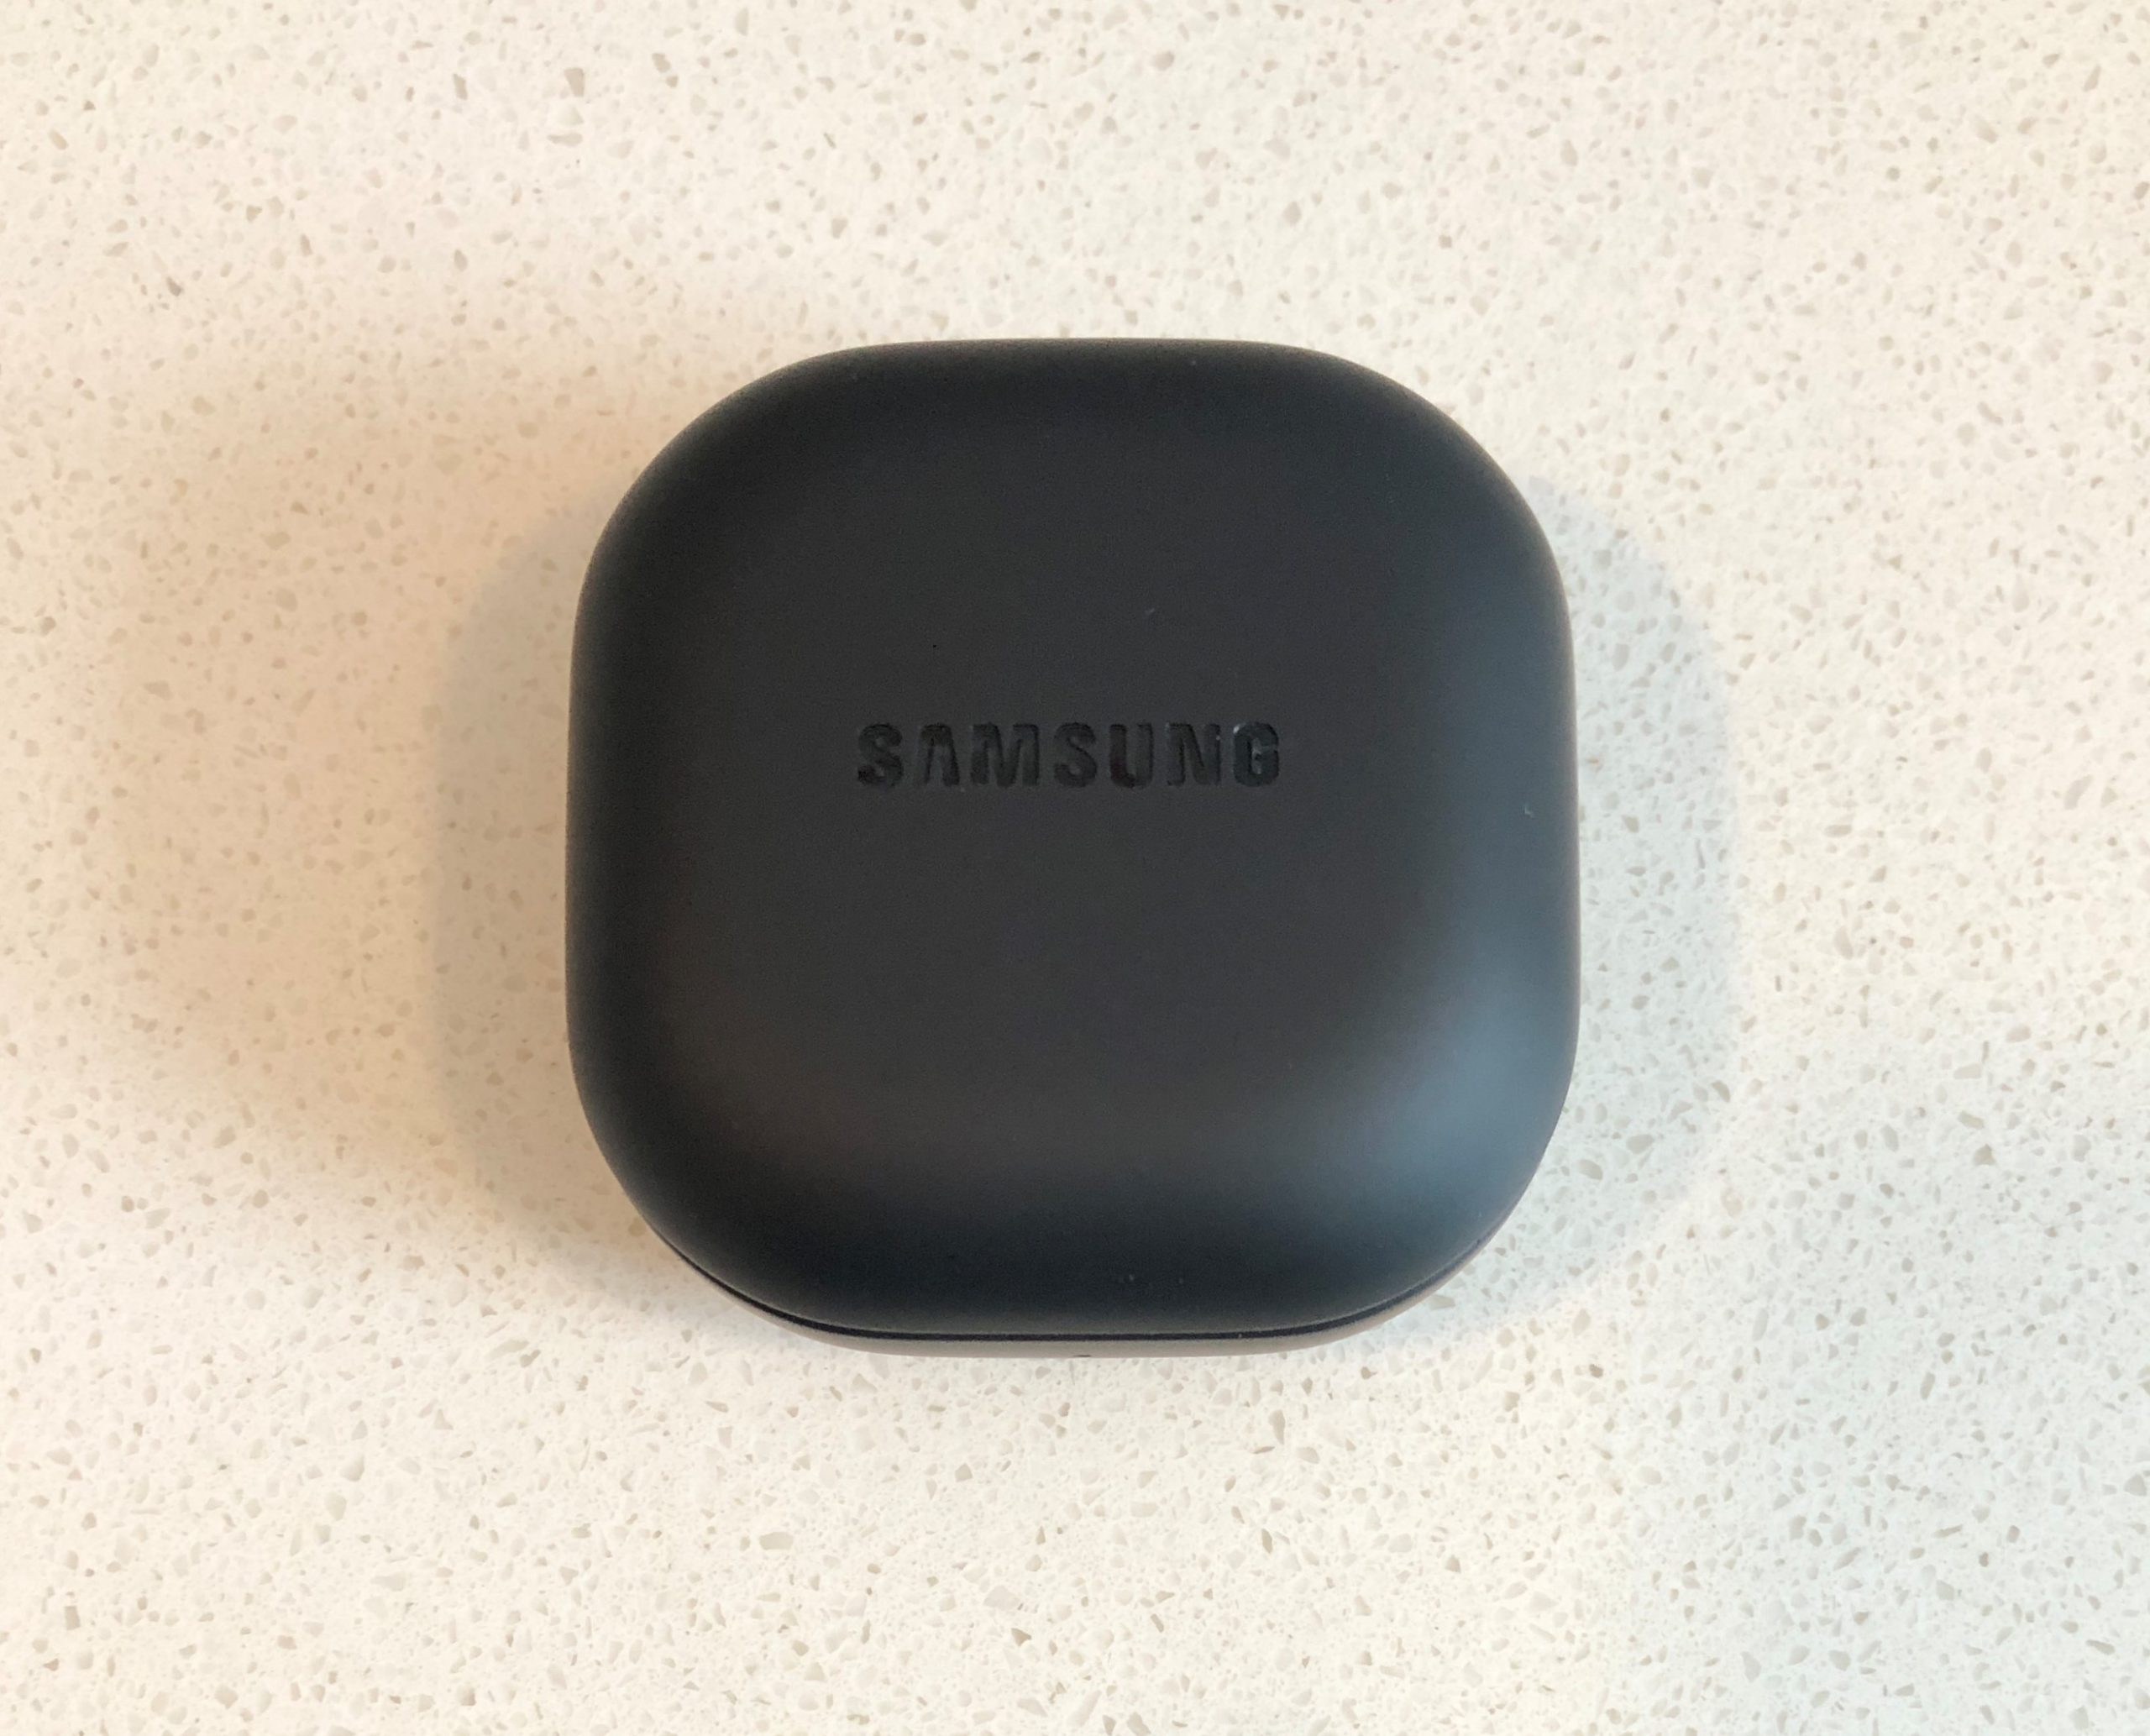 Samsung Galaxy Buds2 Pro charging and carrying case top